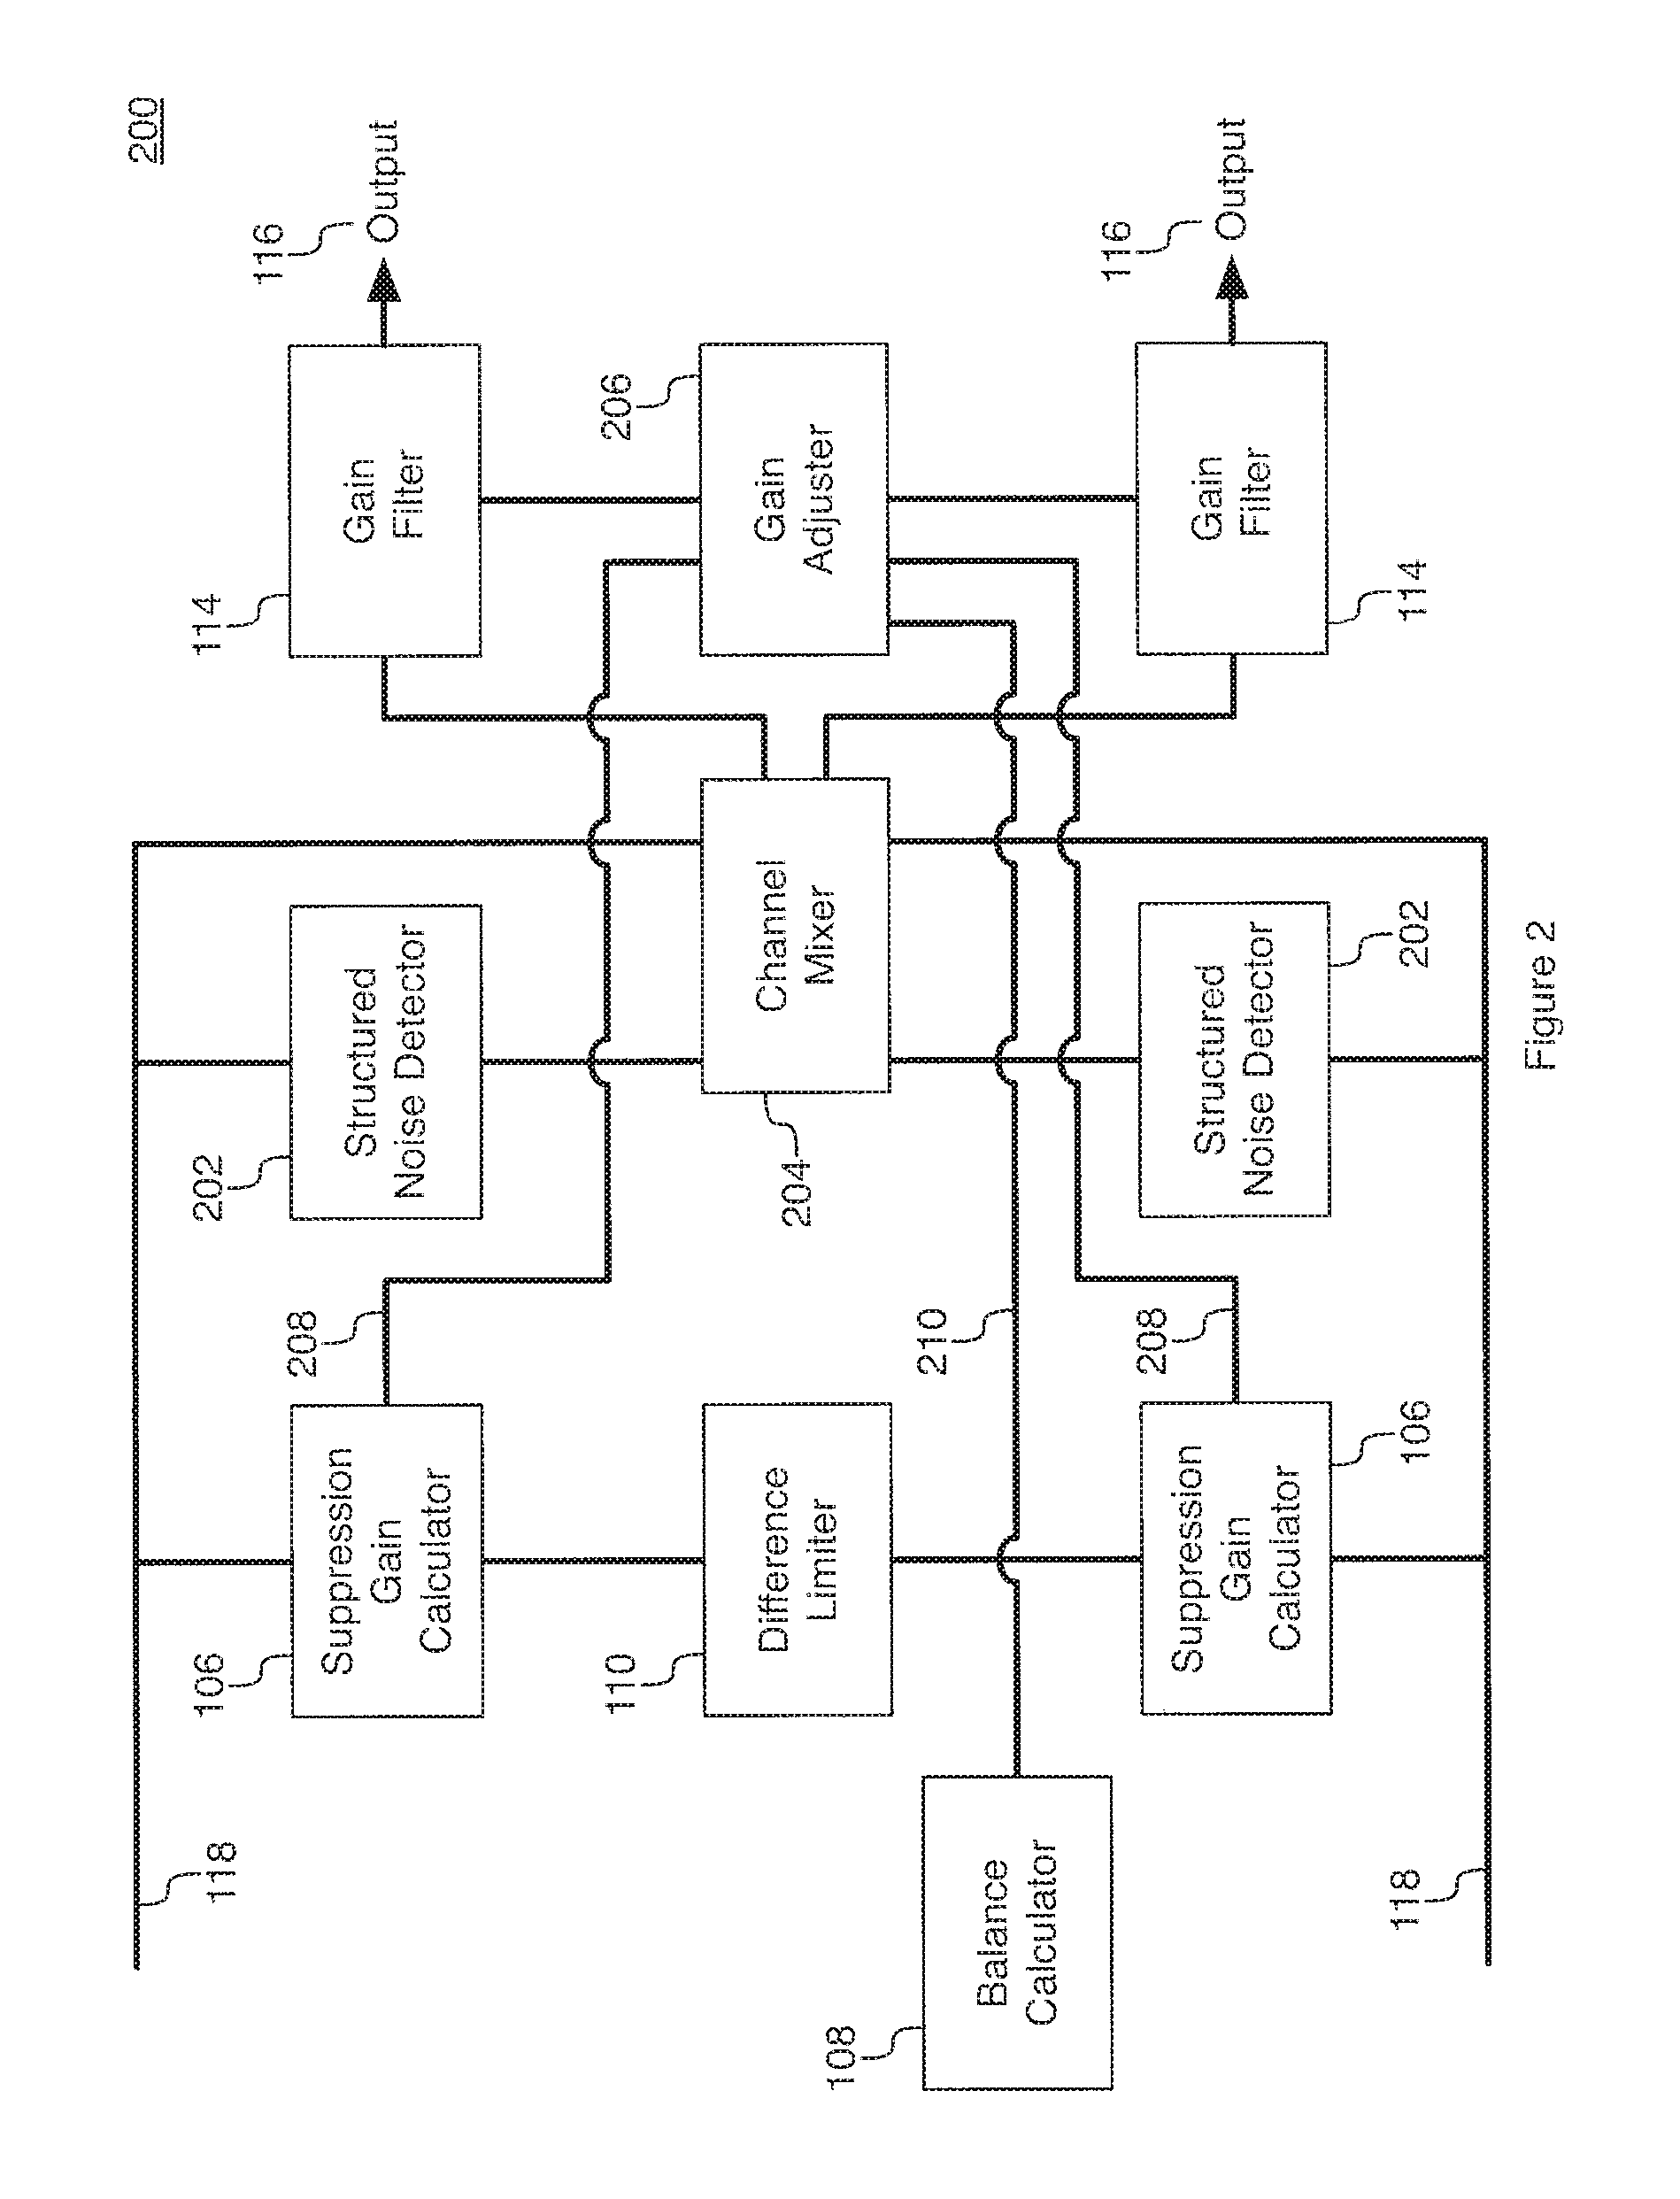 Sound field spatial stabilizer with structured noise compensation